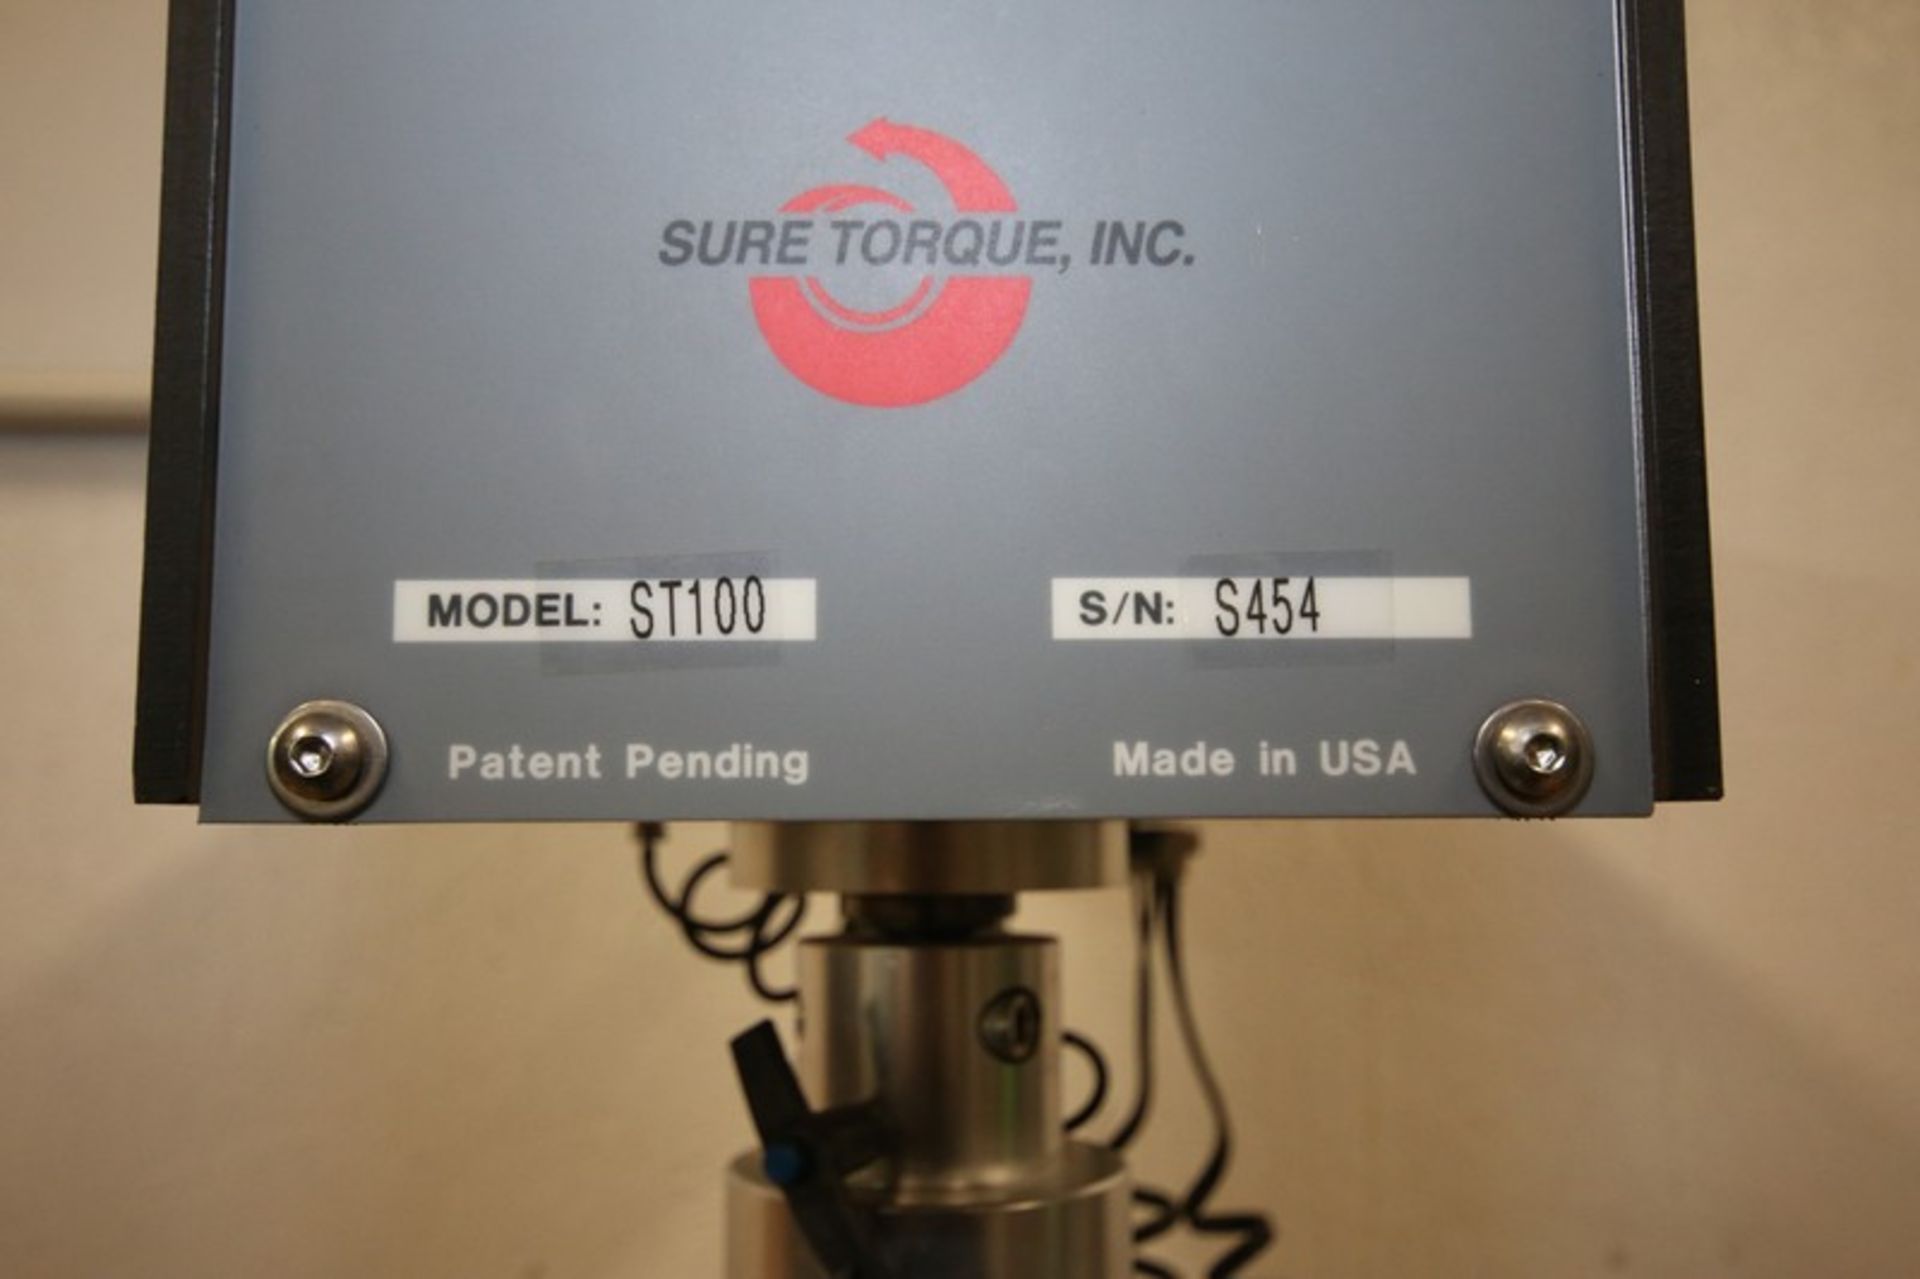 Sure Torque Inc. Torque Tester, Model ST100, SN 5454, 110V (INV#66952) (Located @ the MDG Auction - Image 6 of 6